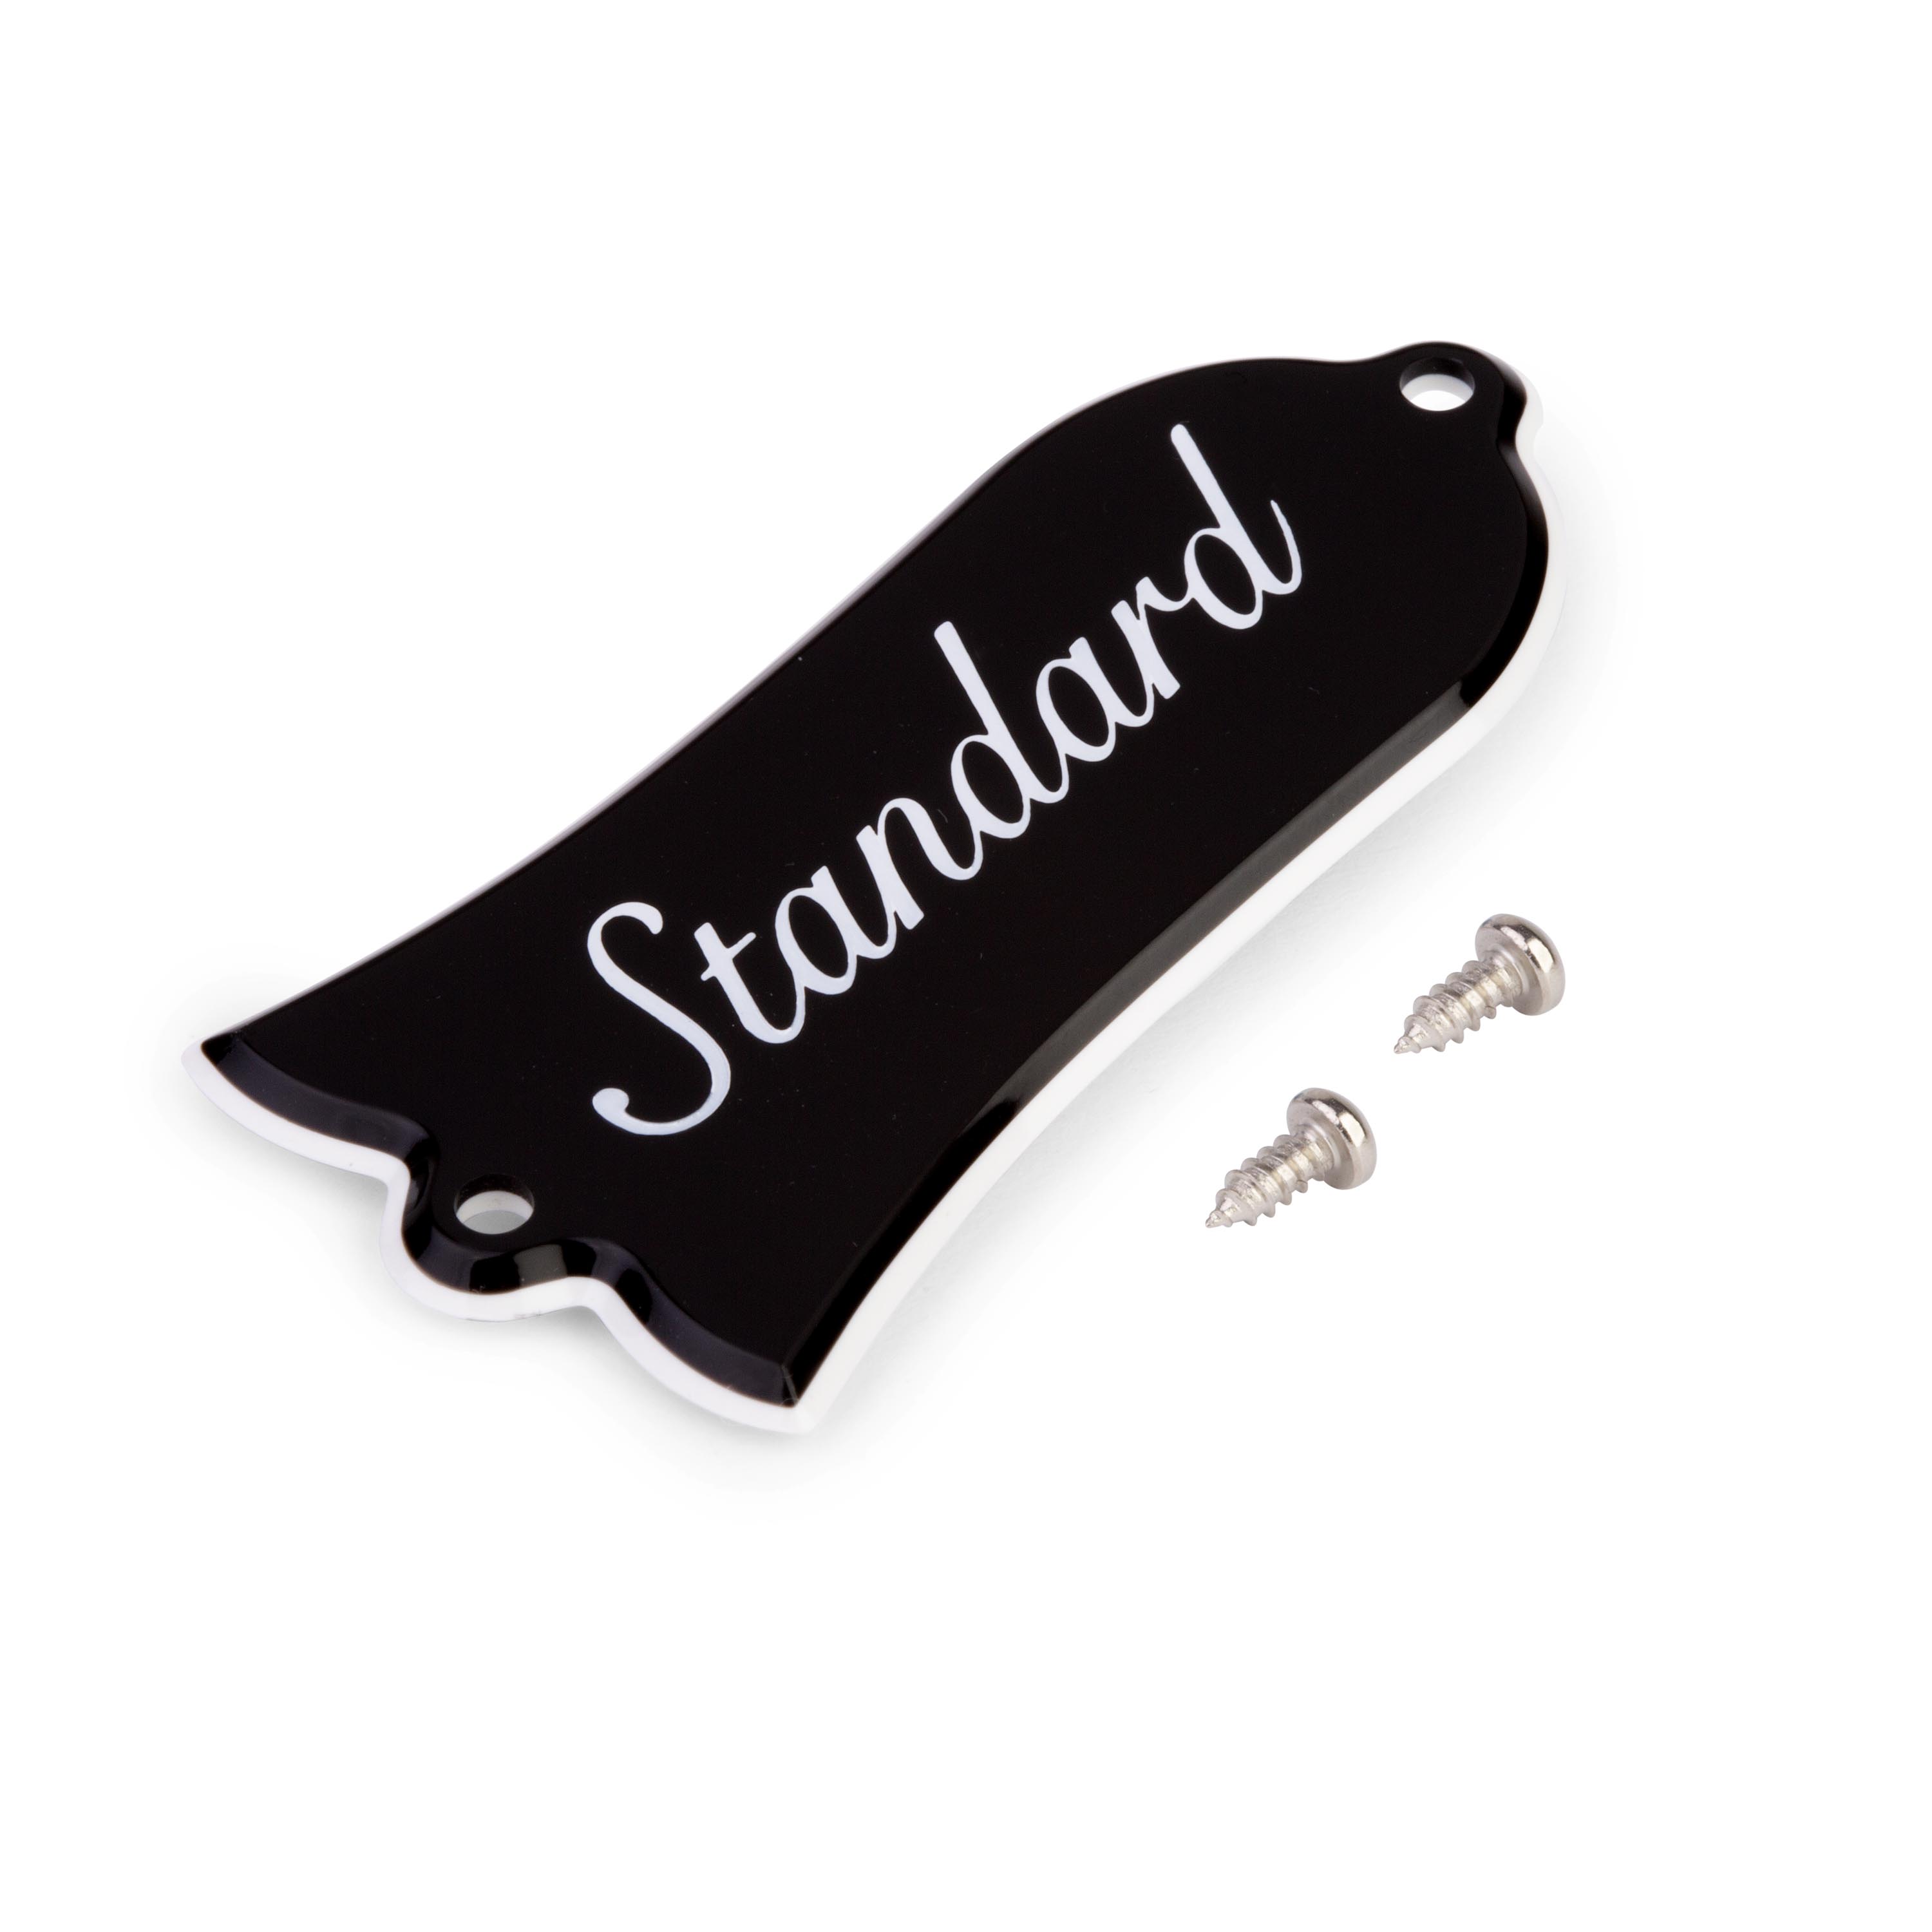 Gibson Accessories Truss Rod Cover